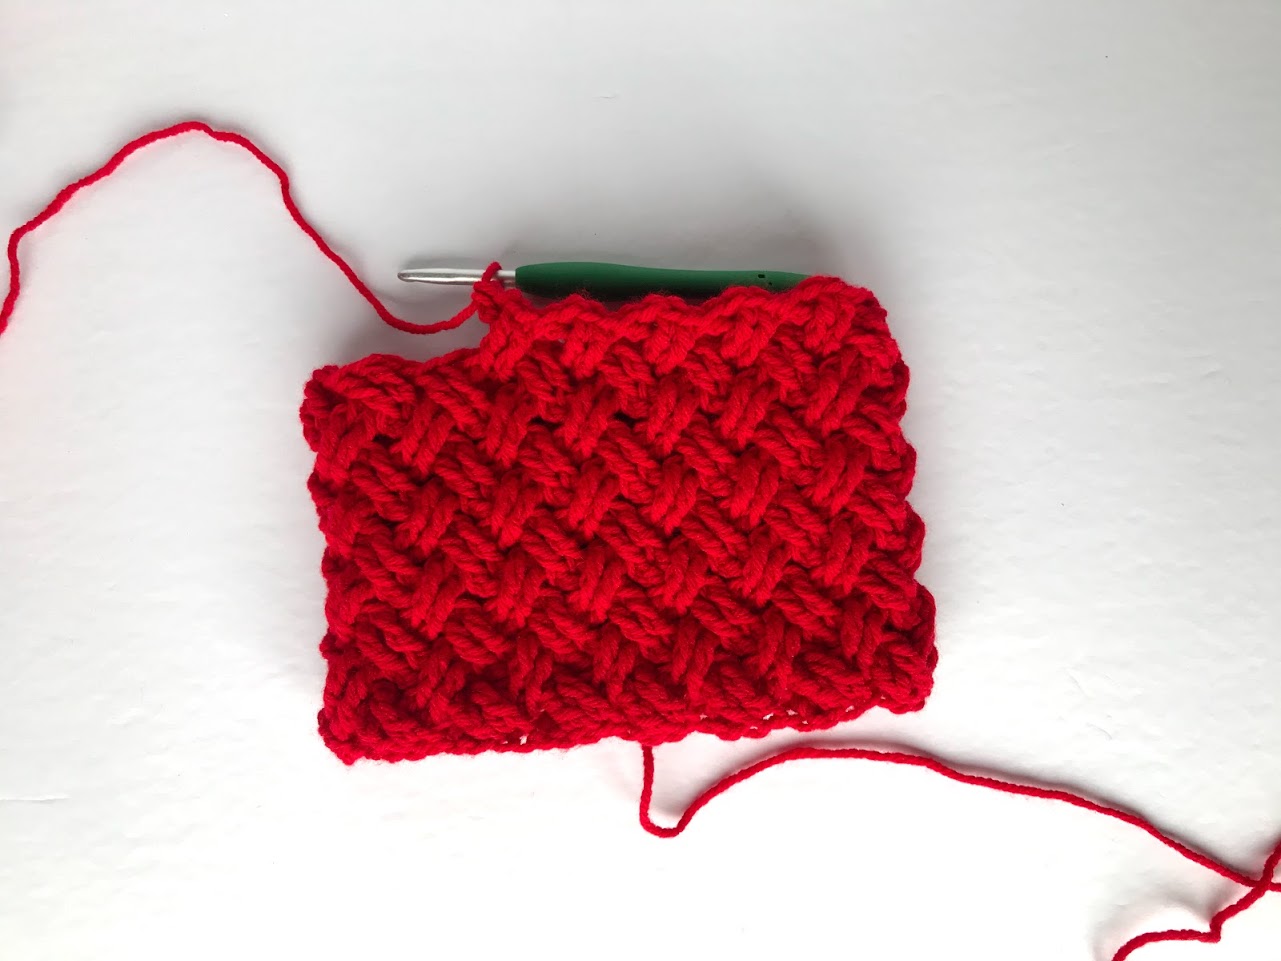 How to Work the Celtic Weave Stitch in the Round - Crochet It Creations